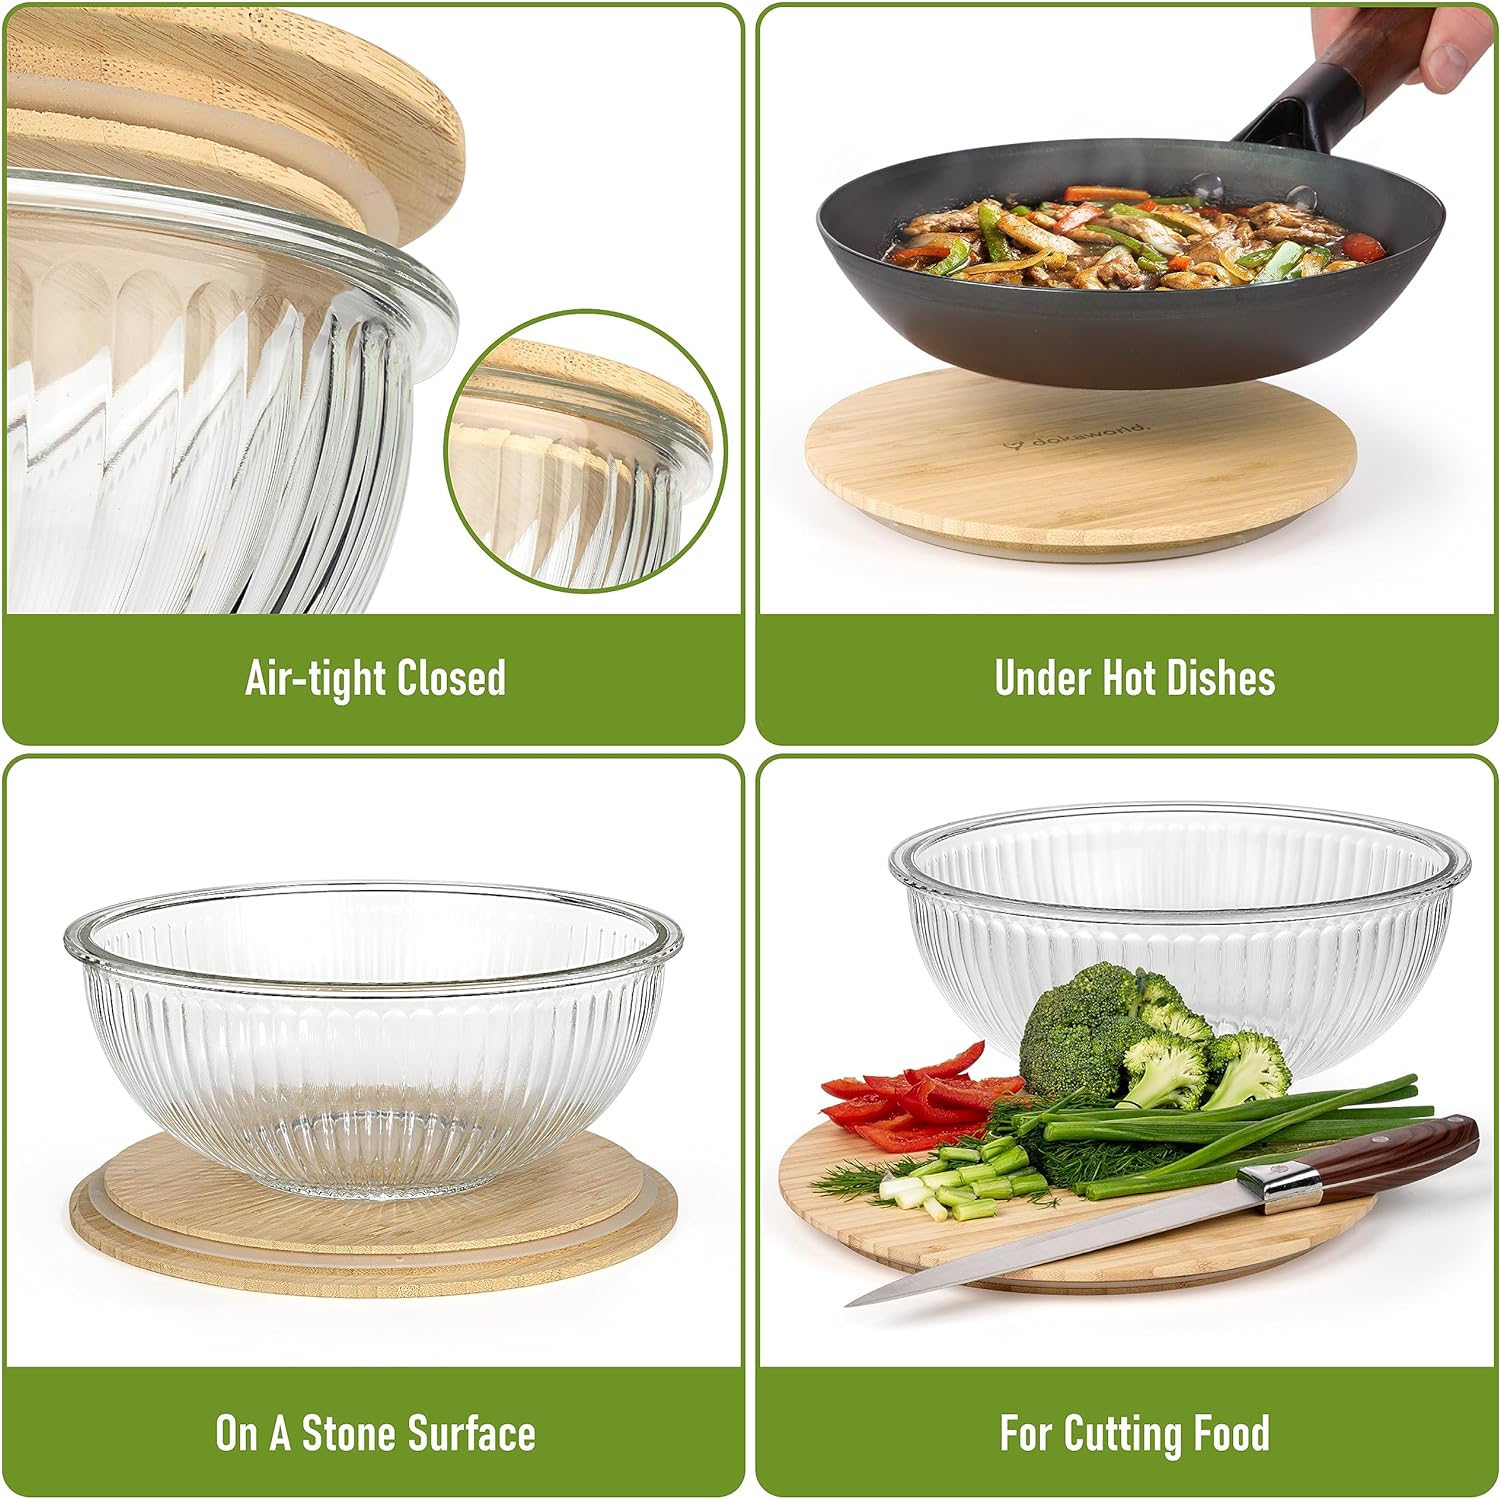 https://bigbigmart.com/wp-content/uploads/2023/09/Dokaworld-Glass-Mixing-Bowls-Nesting-Bowls-Cute-Collapsible-Glass-Bowls-With-Lids-Food-Storage-3-Stackable-Microwave-Safe-Glass-Containers-Salad-Bamboo-Mixing-Bowls-Baking-Glass-Bowls-Set-For-Kitchen.jpg